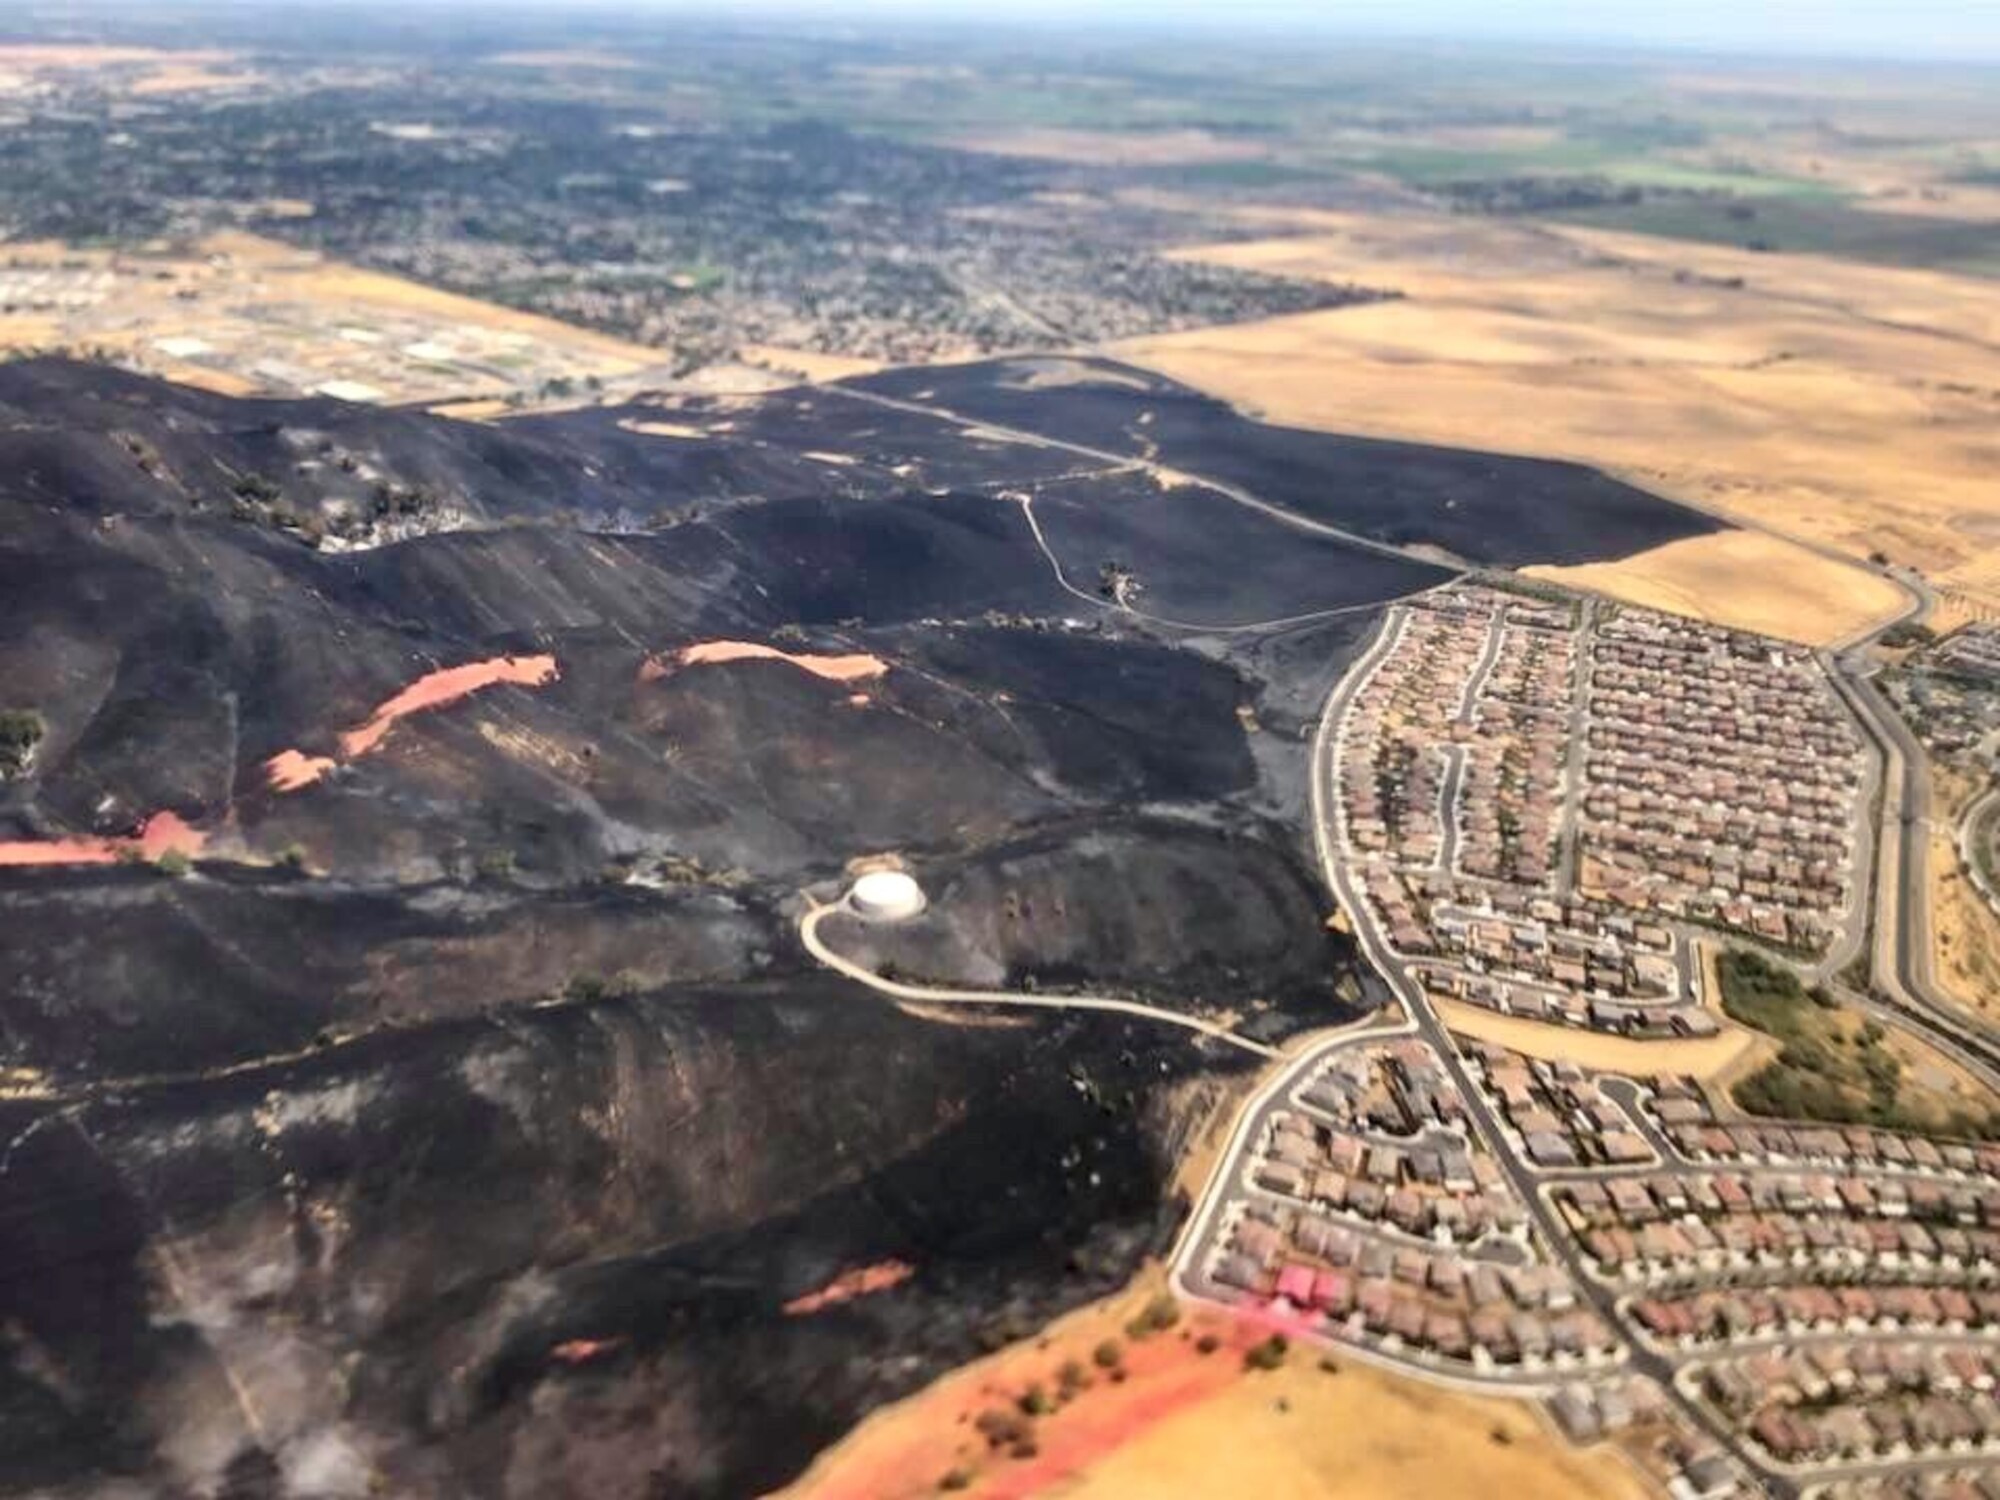 The Nelson Fire in August 2018 destroyed more than 2,000 acres along Interstate 80 in Vacaville, California.  Residents living closest to the wildfire area were forced to evacuate.  In the event of a wildfire, follow the directions of local civil authorities.  (Courtesy photo)